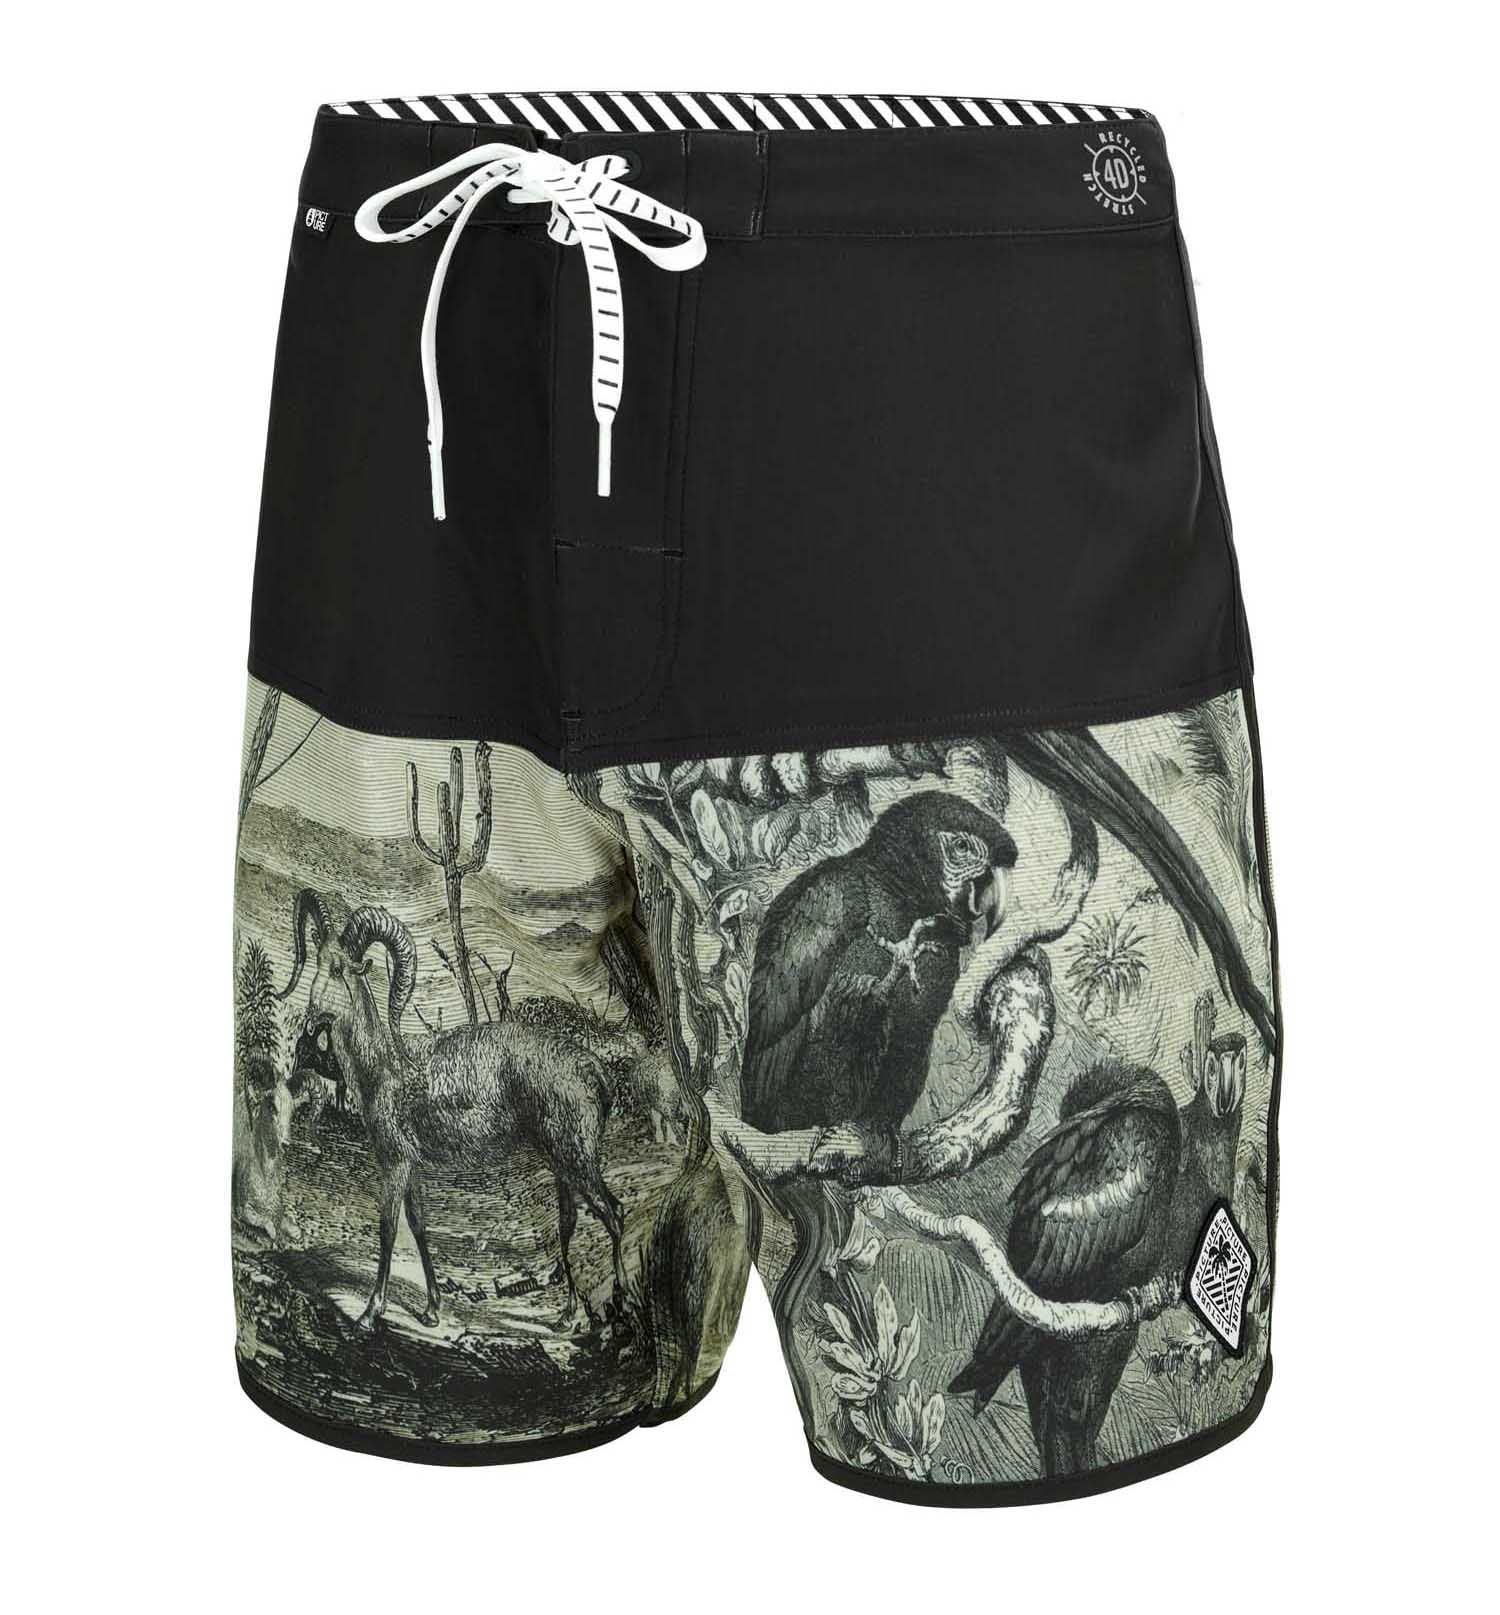 Picture Andy 17 Boardshort Black 16484